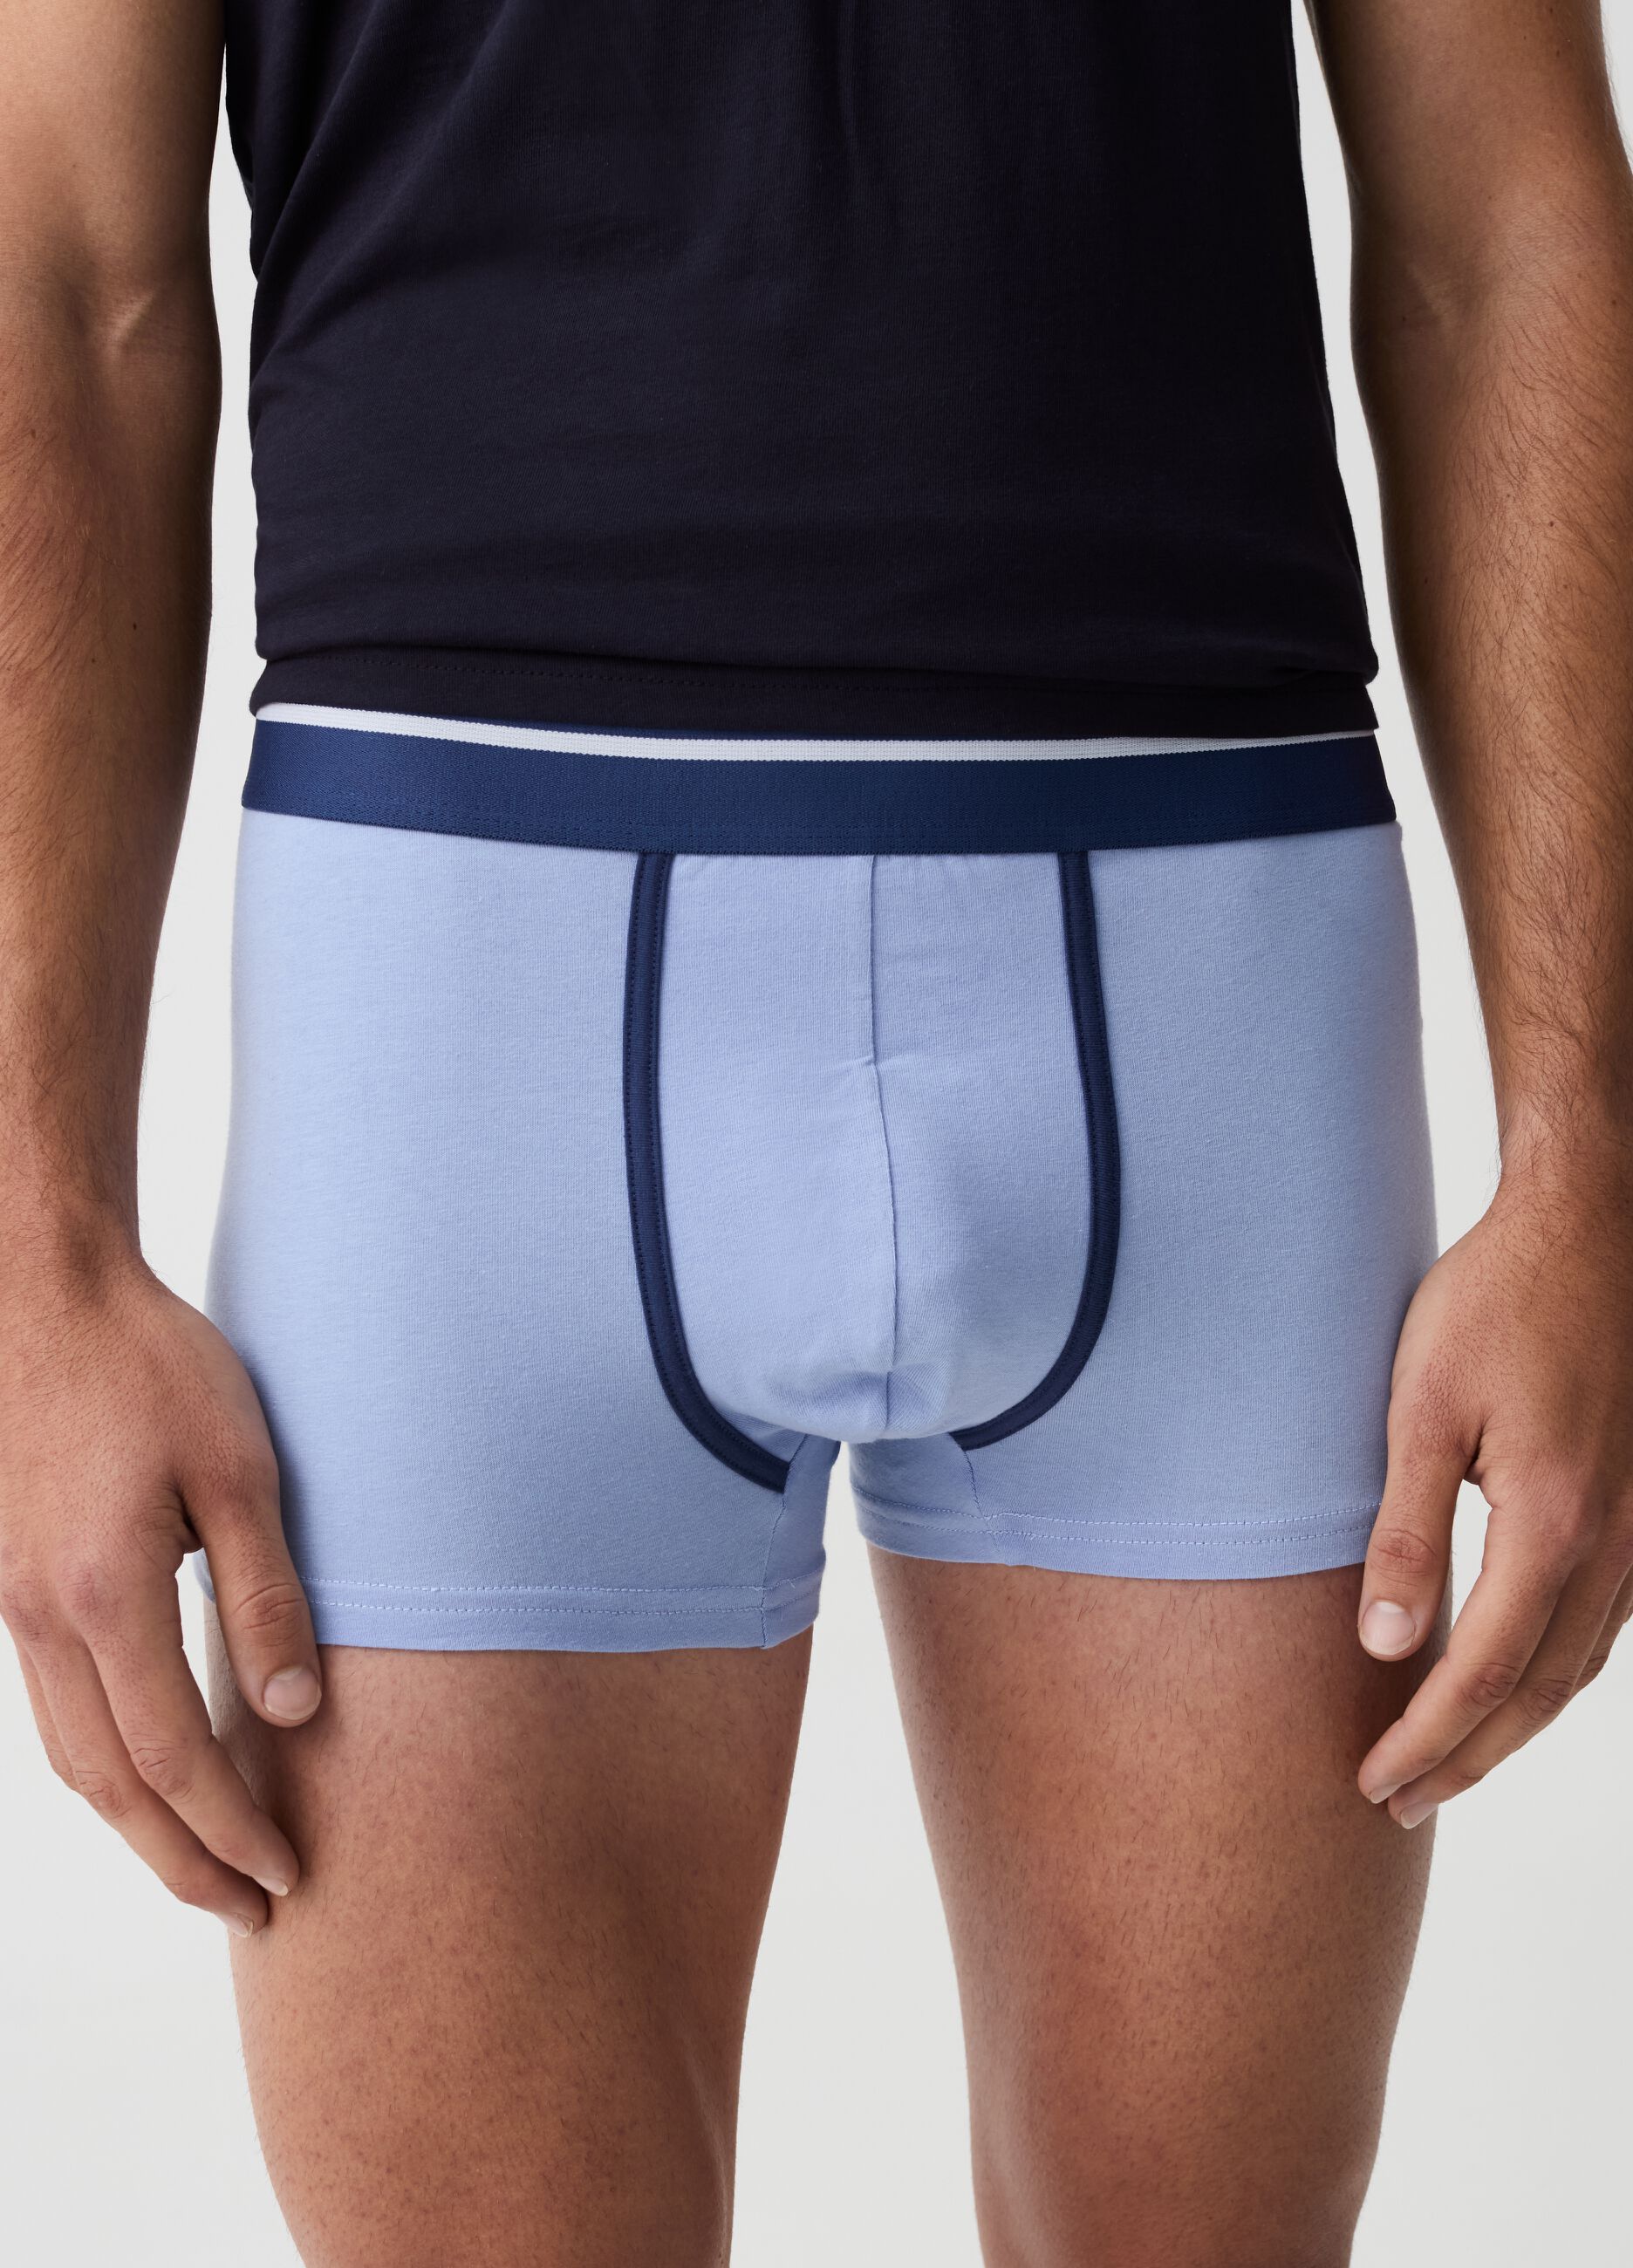 Three-pair pack boxer shorts with striped trim